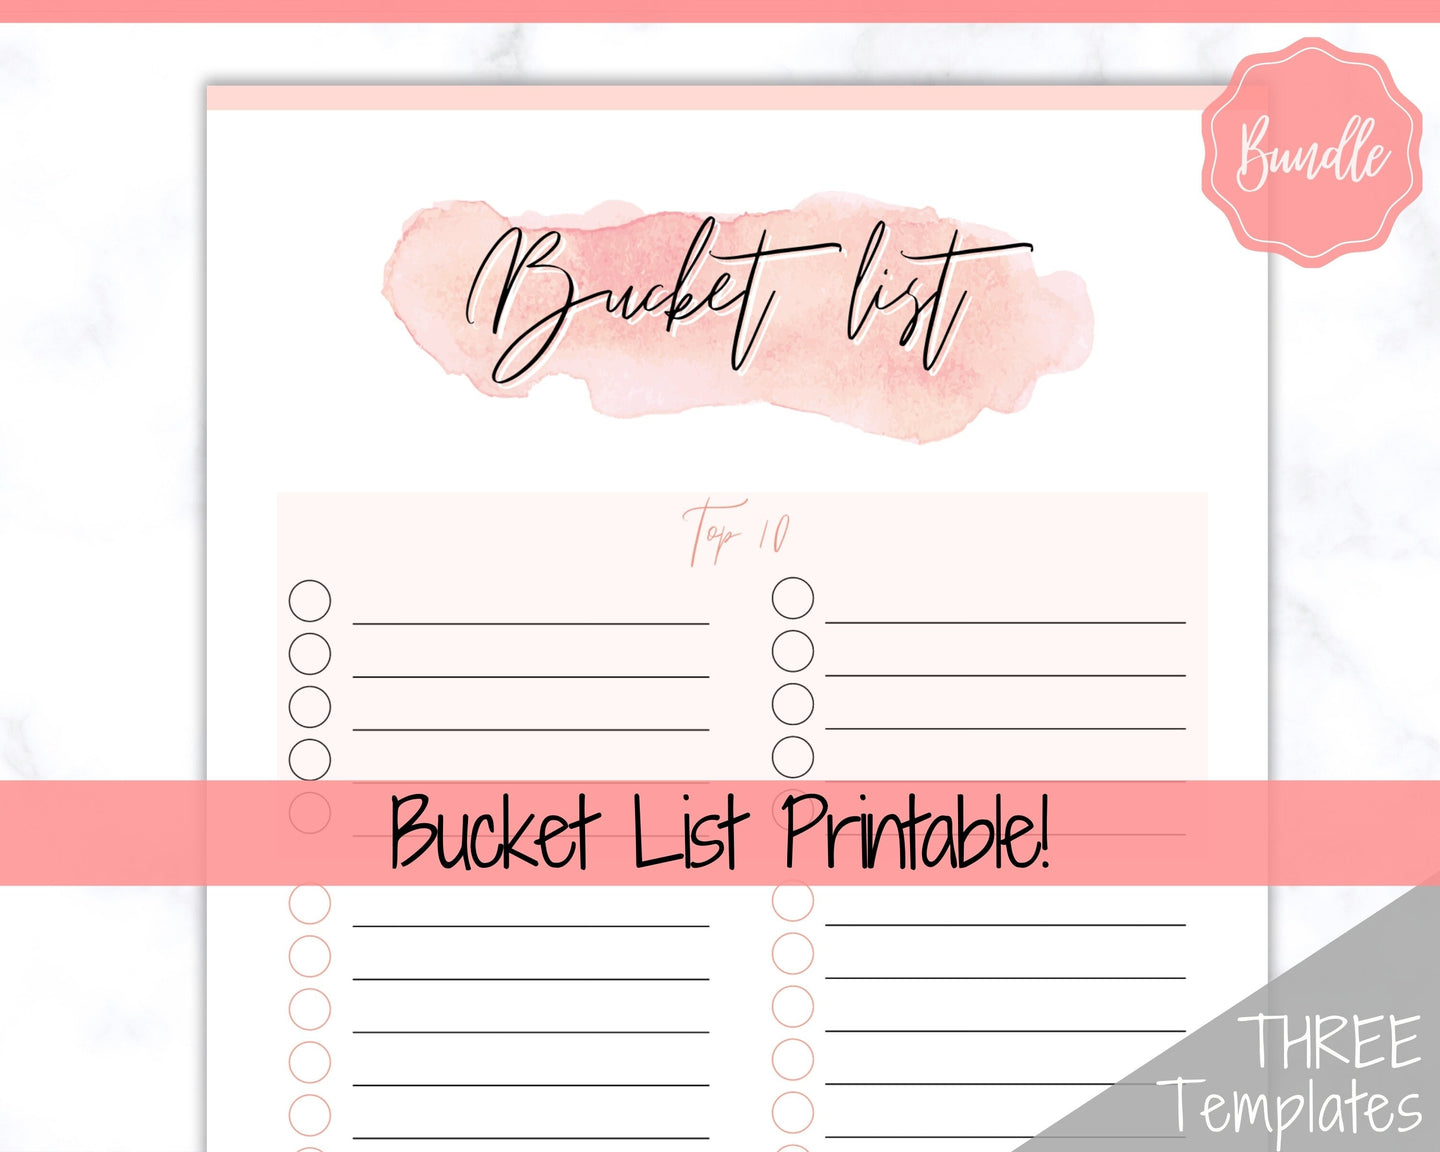 Bucket List Printable! 3 Templates Included! Top 100 things to do, Wish List Tracker, Holiday, Travel, New Year, Goal Planner, To Do List | Watercolor